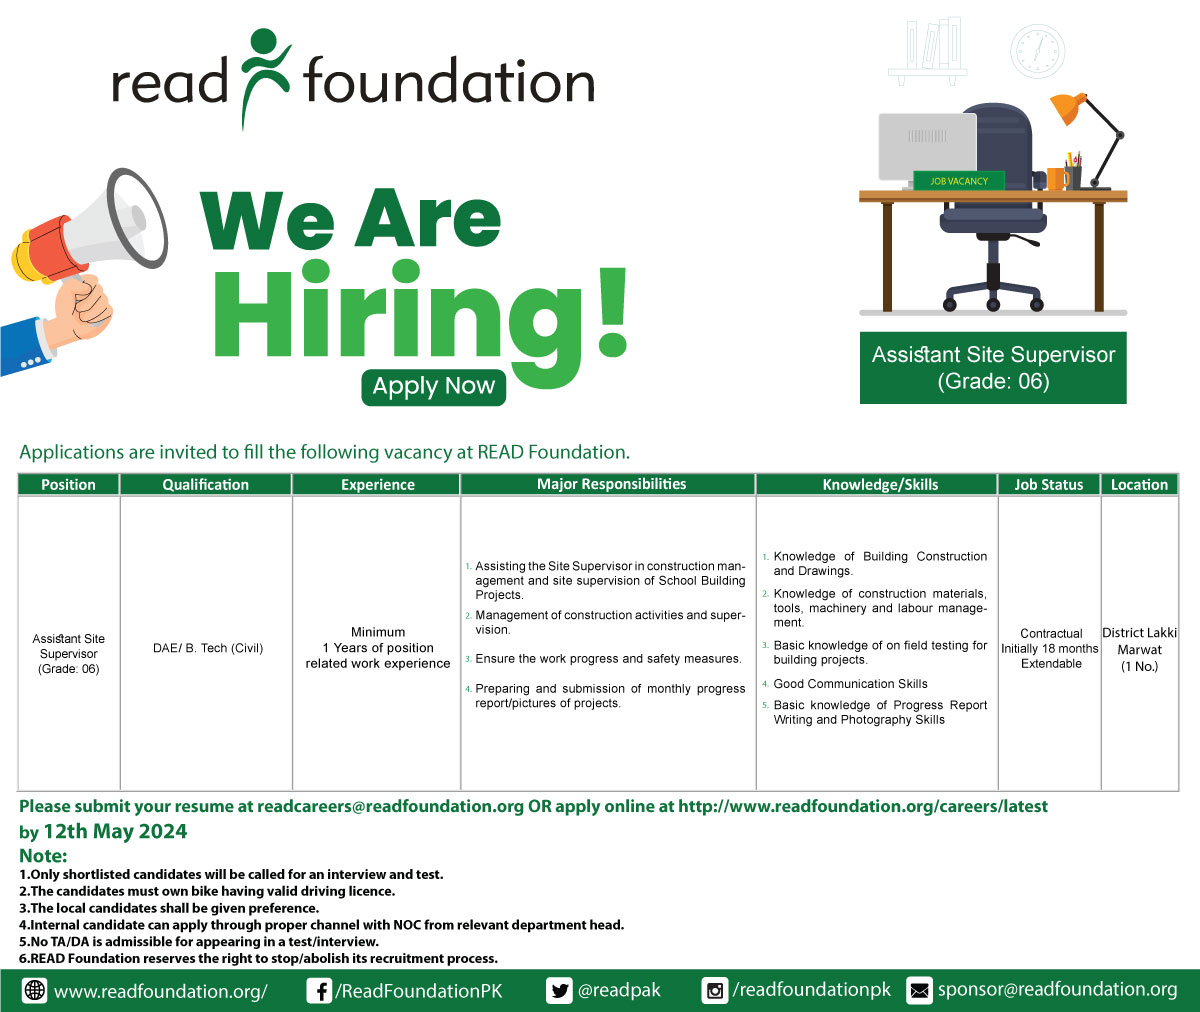 Job Alert!!! Join our dynamic team and unlock your potential! We're hiring talented individuals who are passionate and ready to make a difference. Apply now and take the next step towards a fulfilling career. Please apply at the given link: readfoundation.org/careers/ (For any